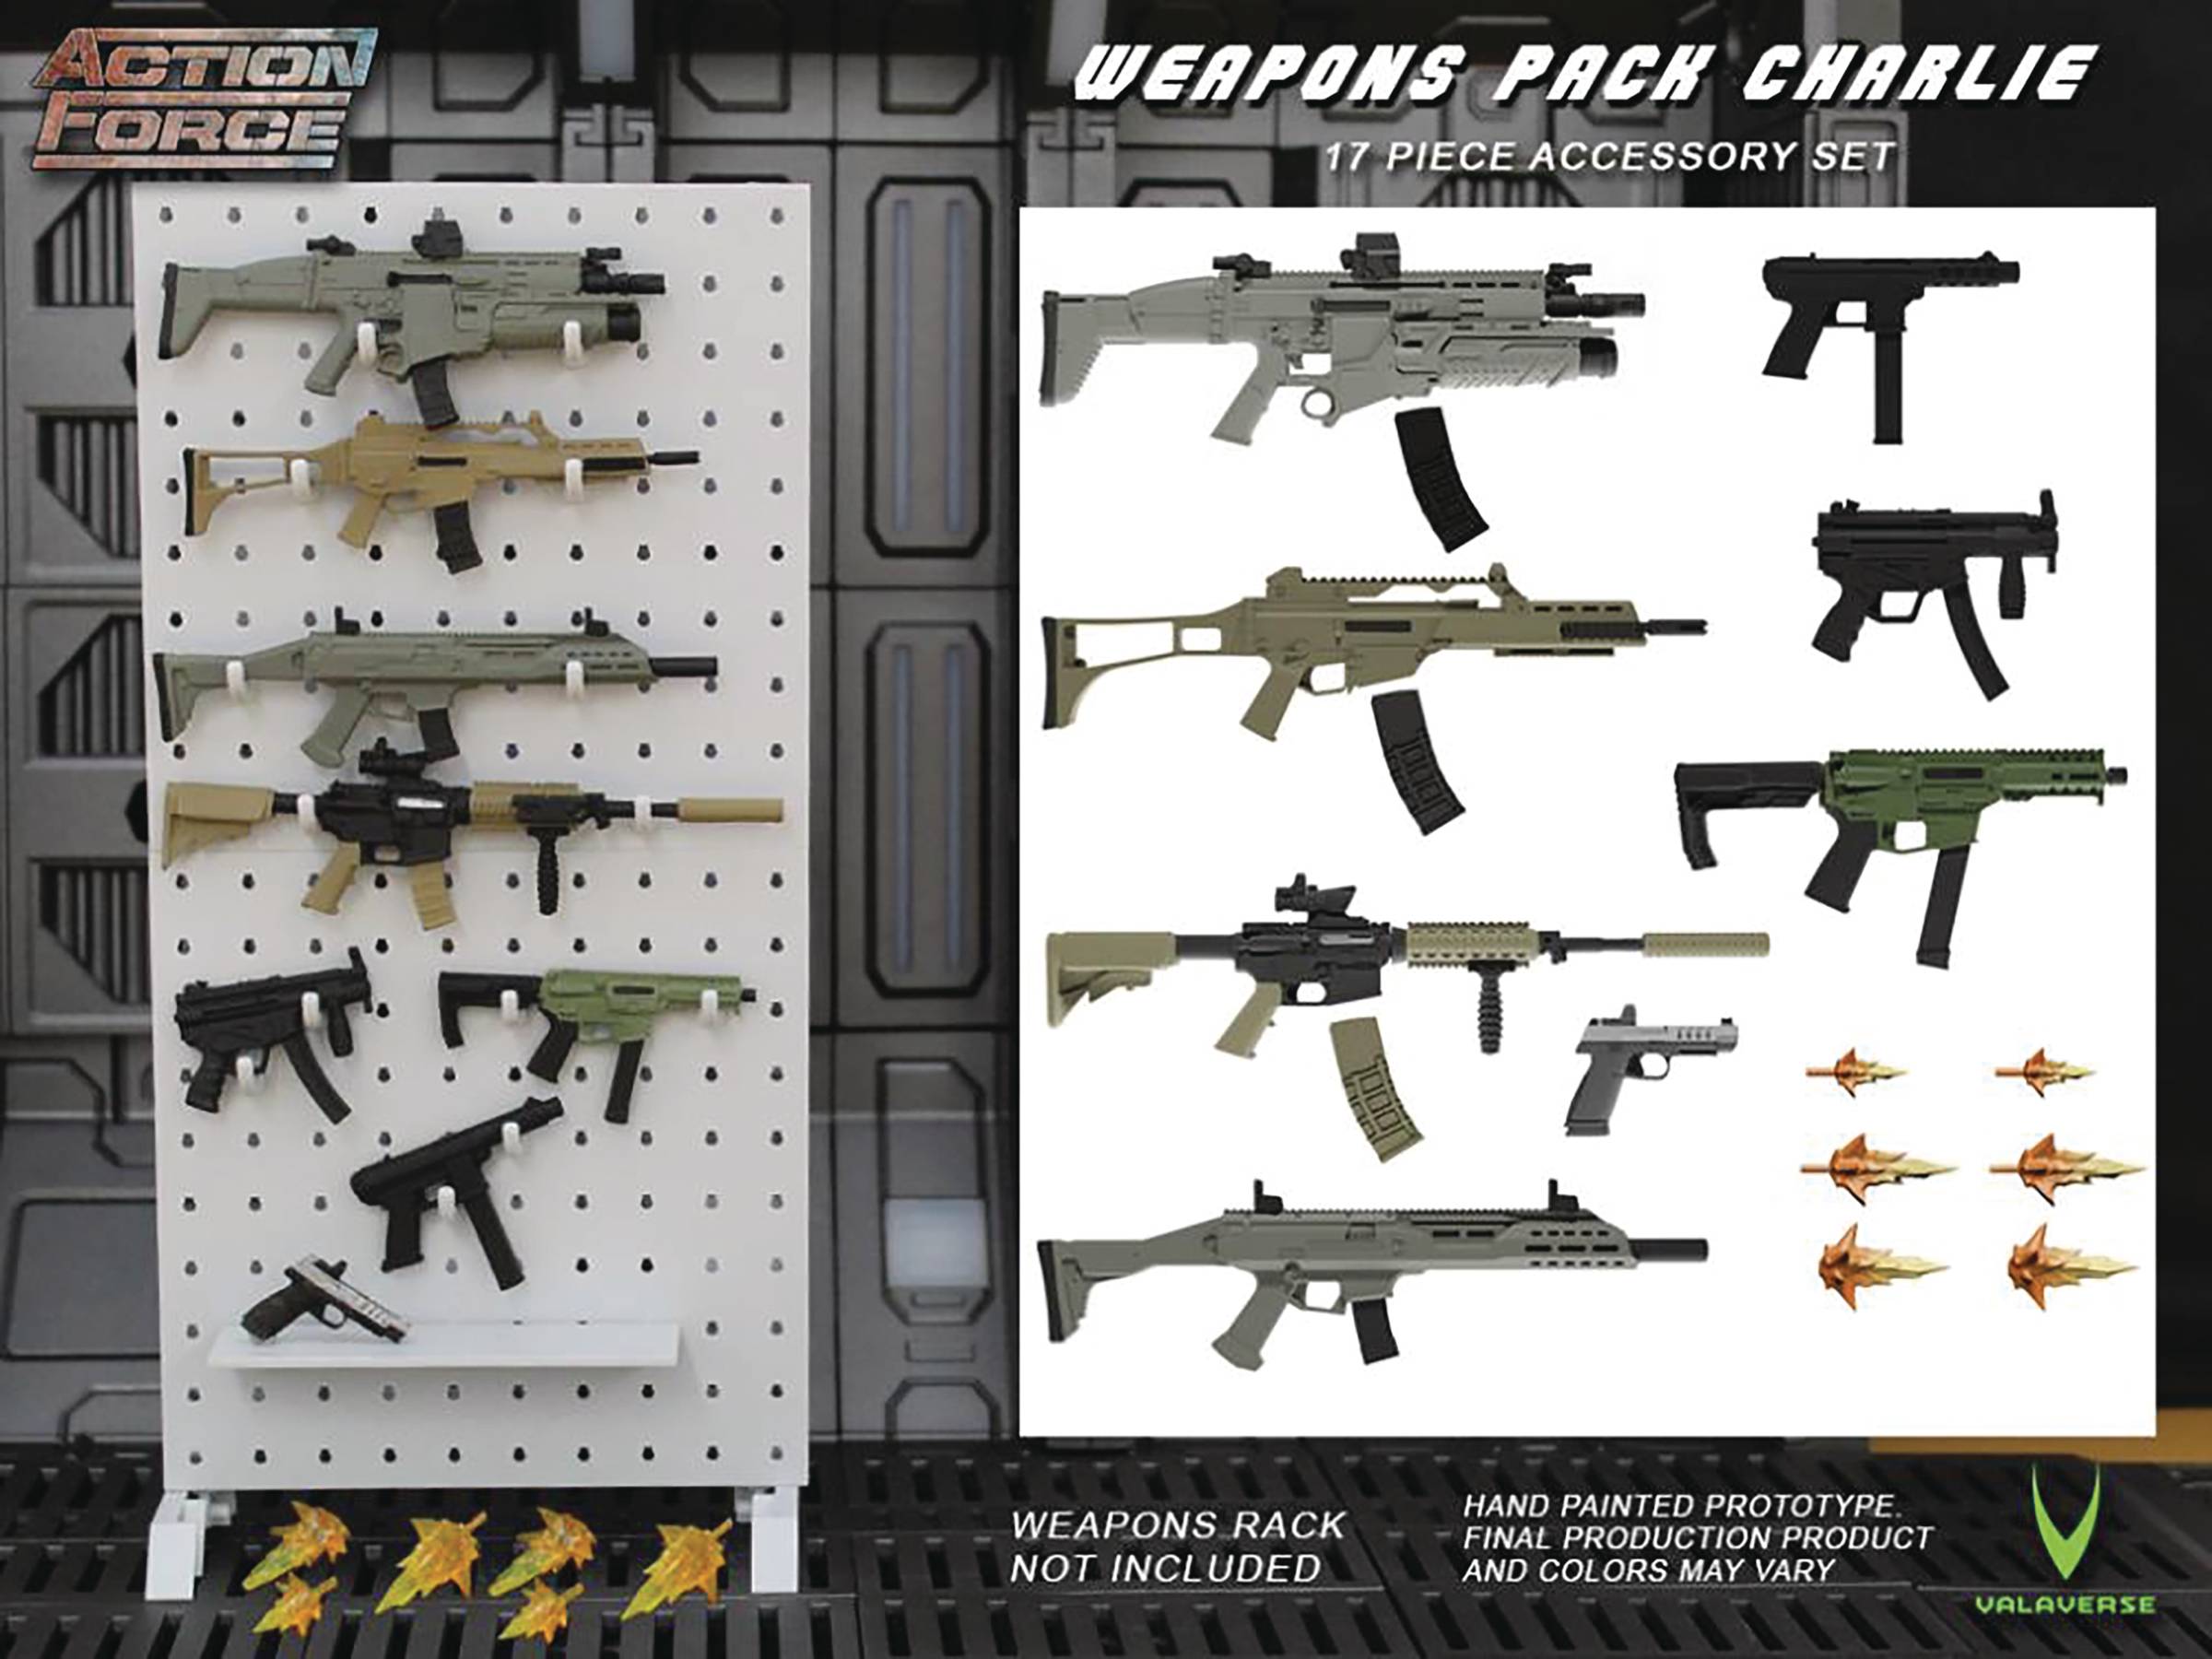 ACTION FORCE SERIES 2 WEAPONS PACK CHARLIE 1/12 SCALE AF (NE